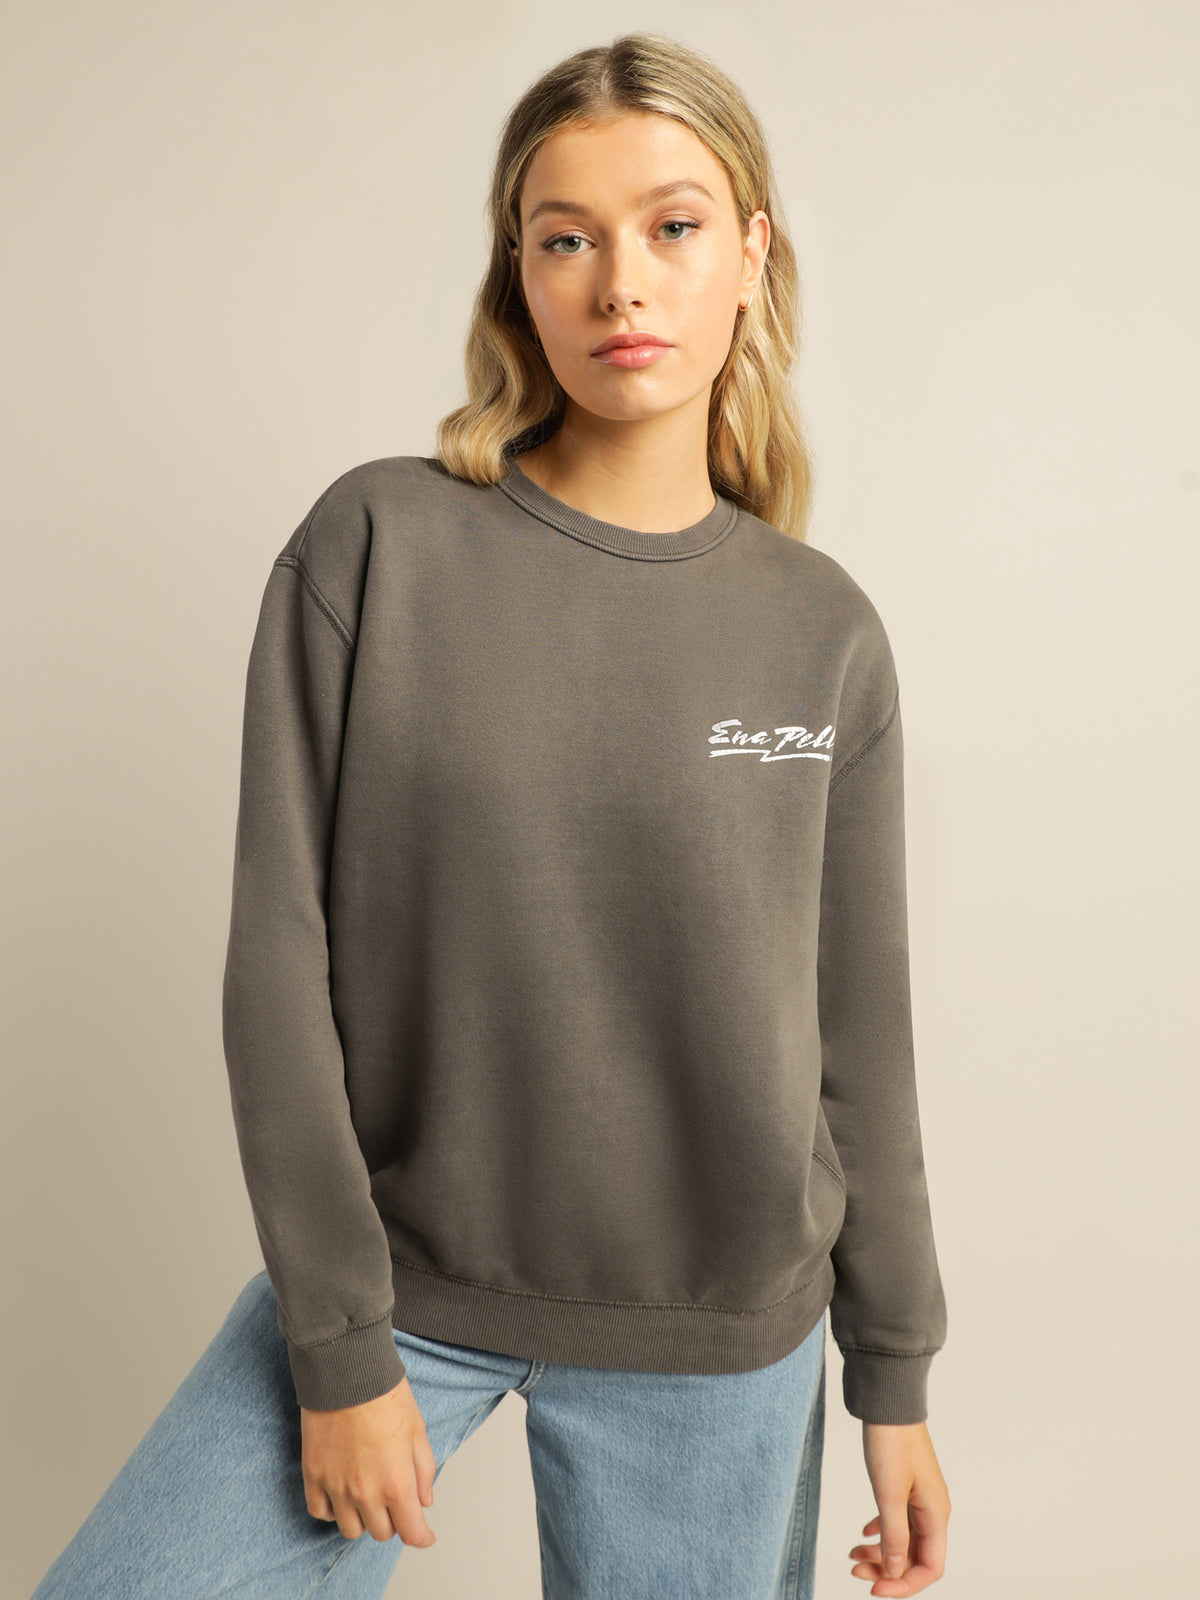 Winged Shield Sweater in Charcoal